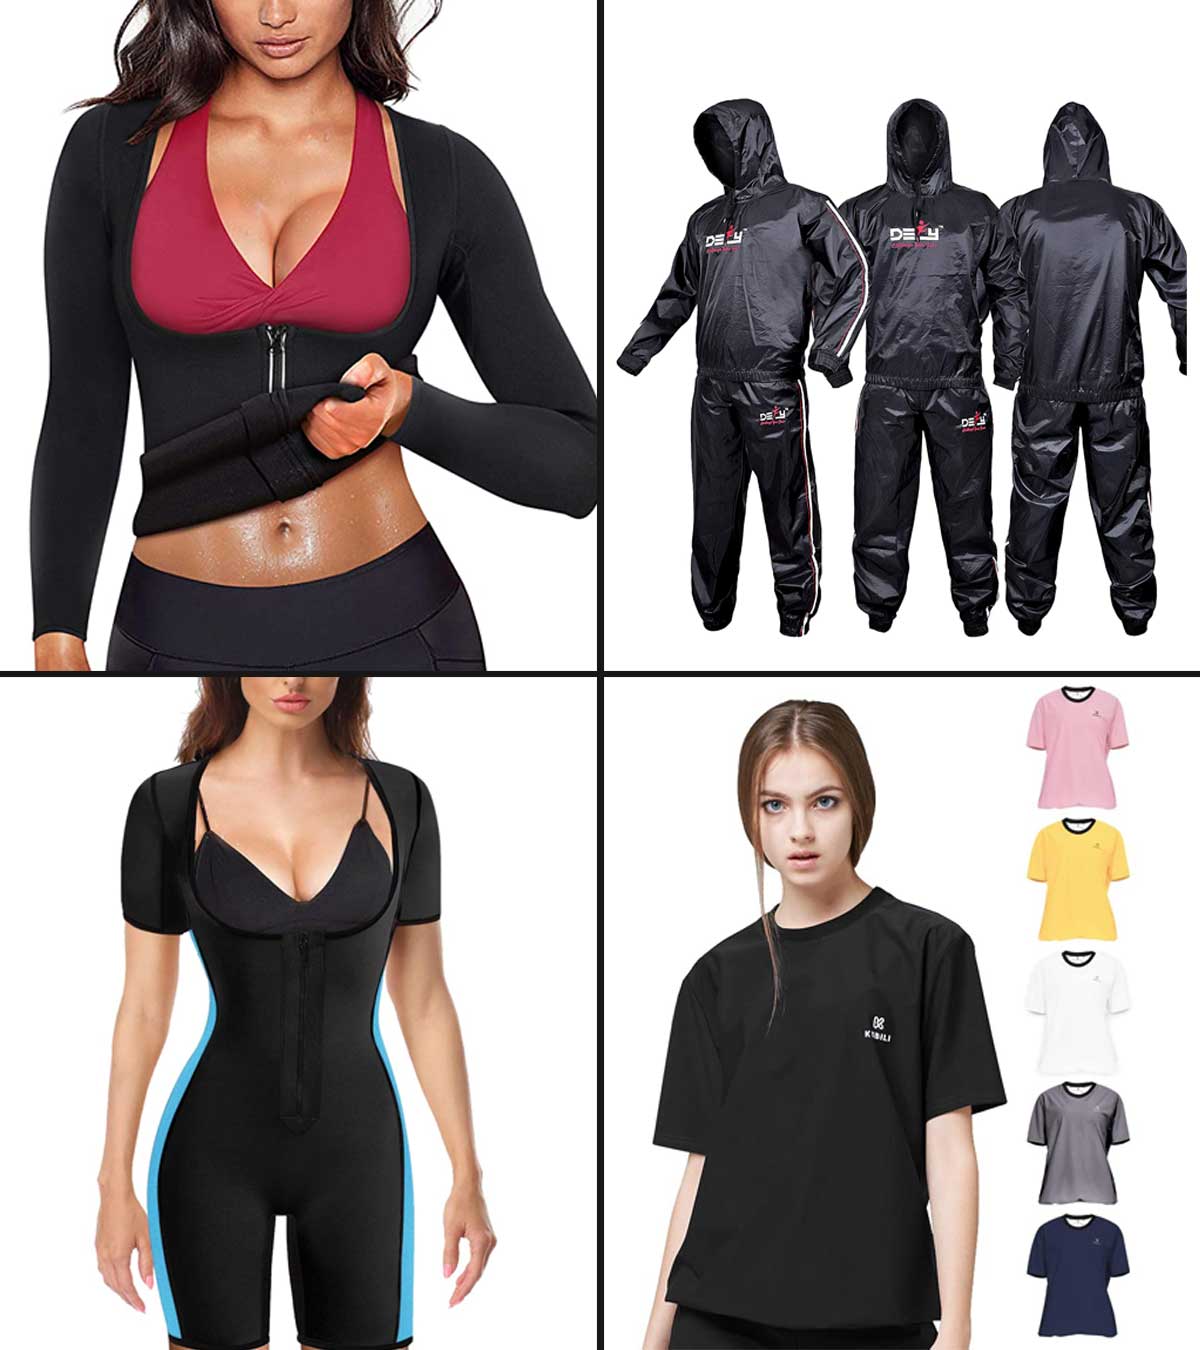 Sweat more, quicker results with WhatWaist Full Body Sauna Suit